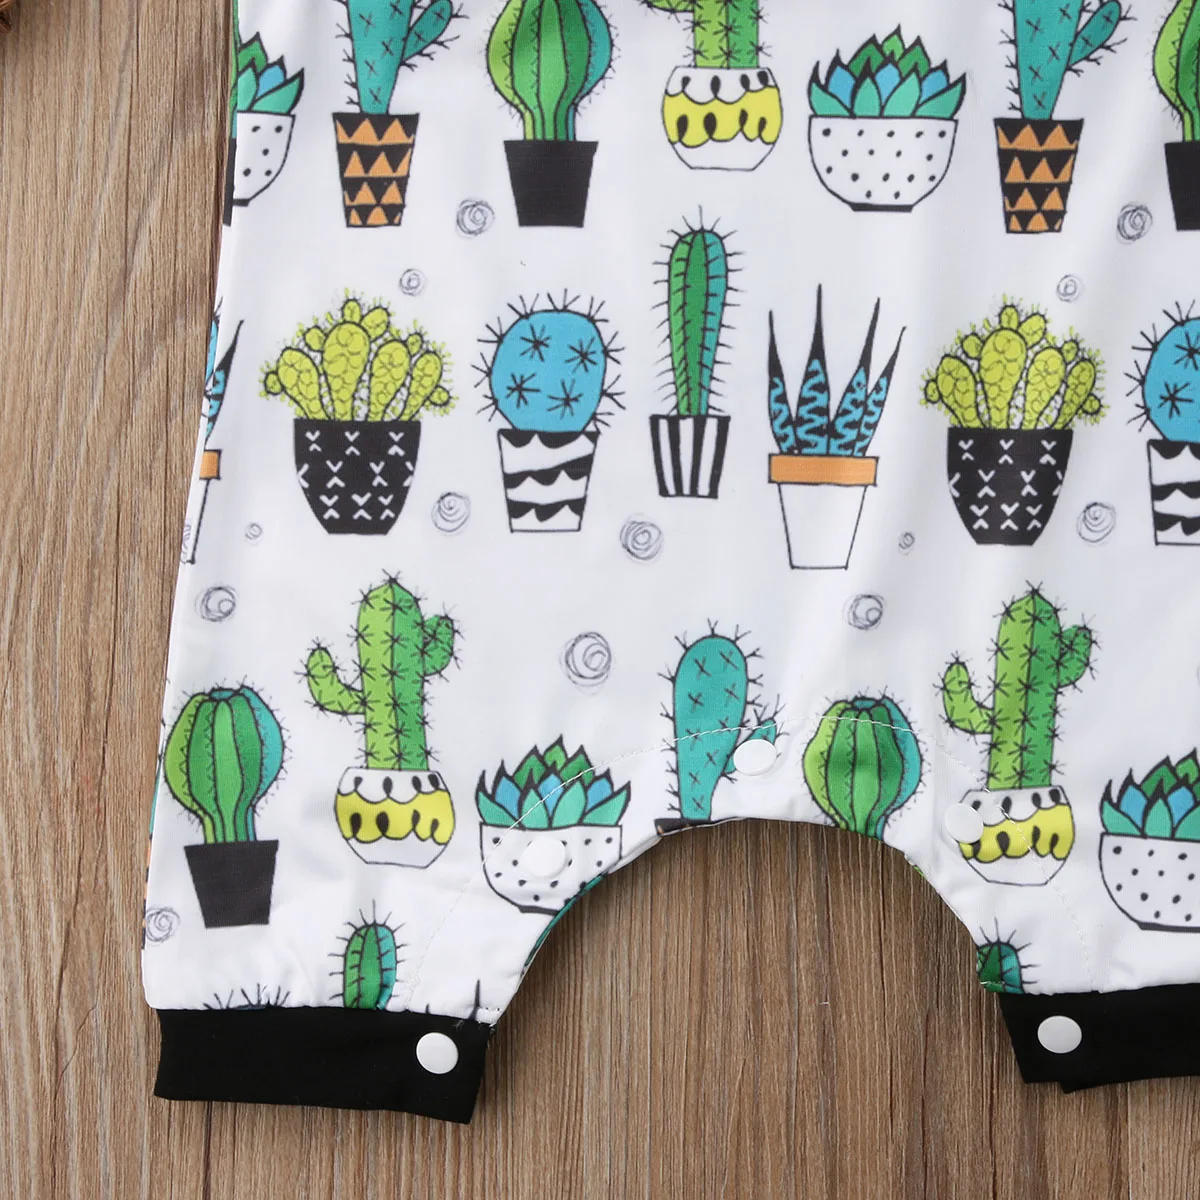 2018 Brand New Newborn Infant Toddler Baby Boy Girl Floral Sleeveless Romper Jumpsuit Clothes Cactus Outfit Summer Sunsuit Baby Bodysuits made from viscose  Baby Rompers